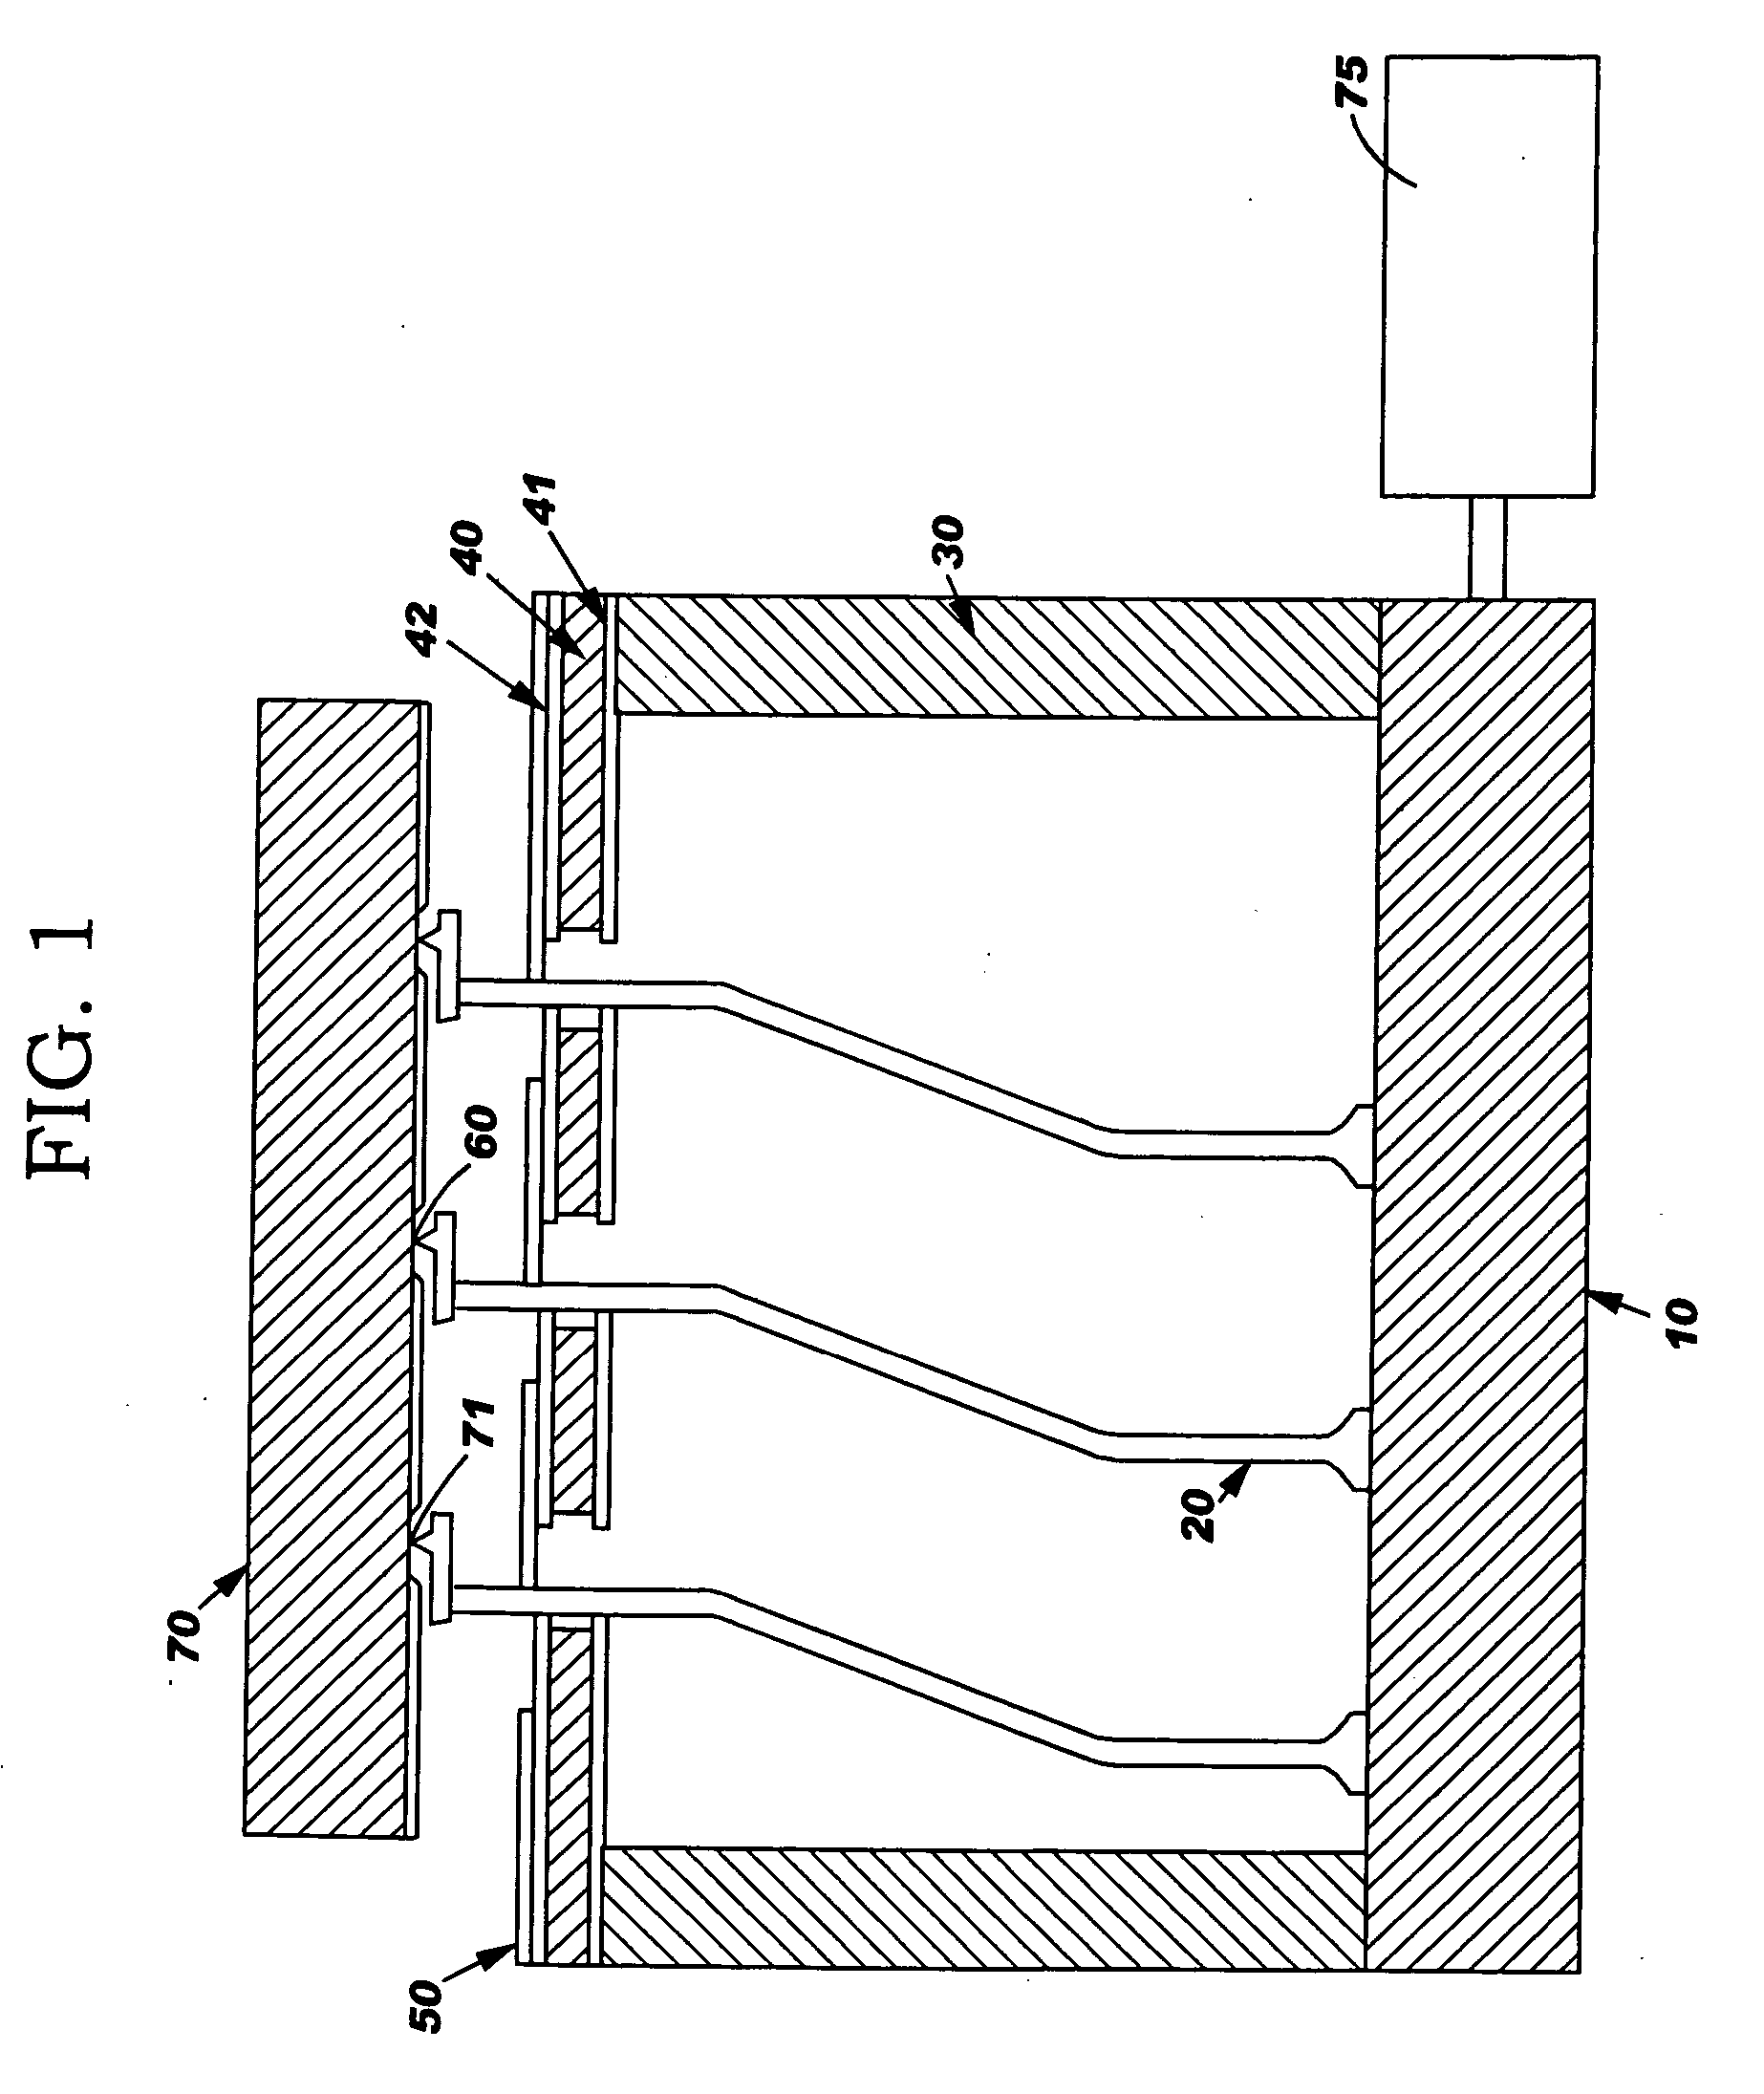 Electrical connector design and contact geometry and method of use thereof and methods of fabrication thereof